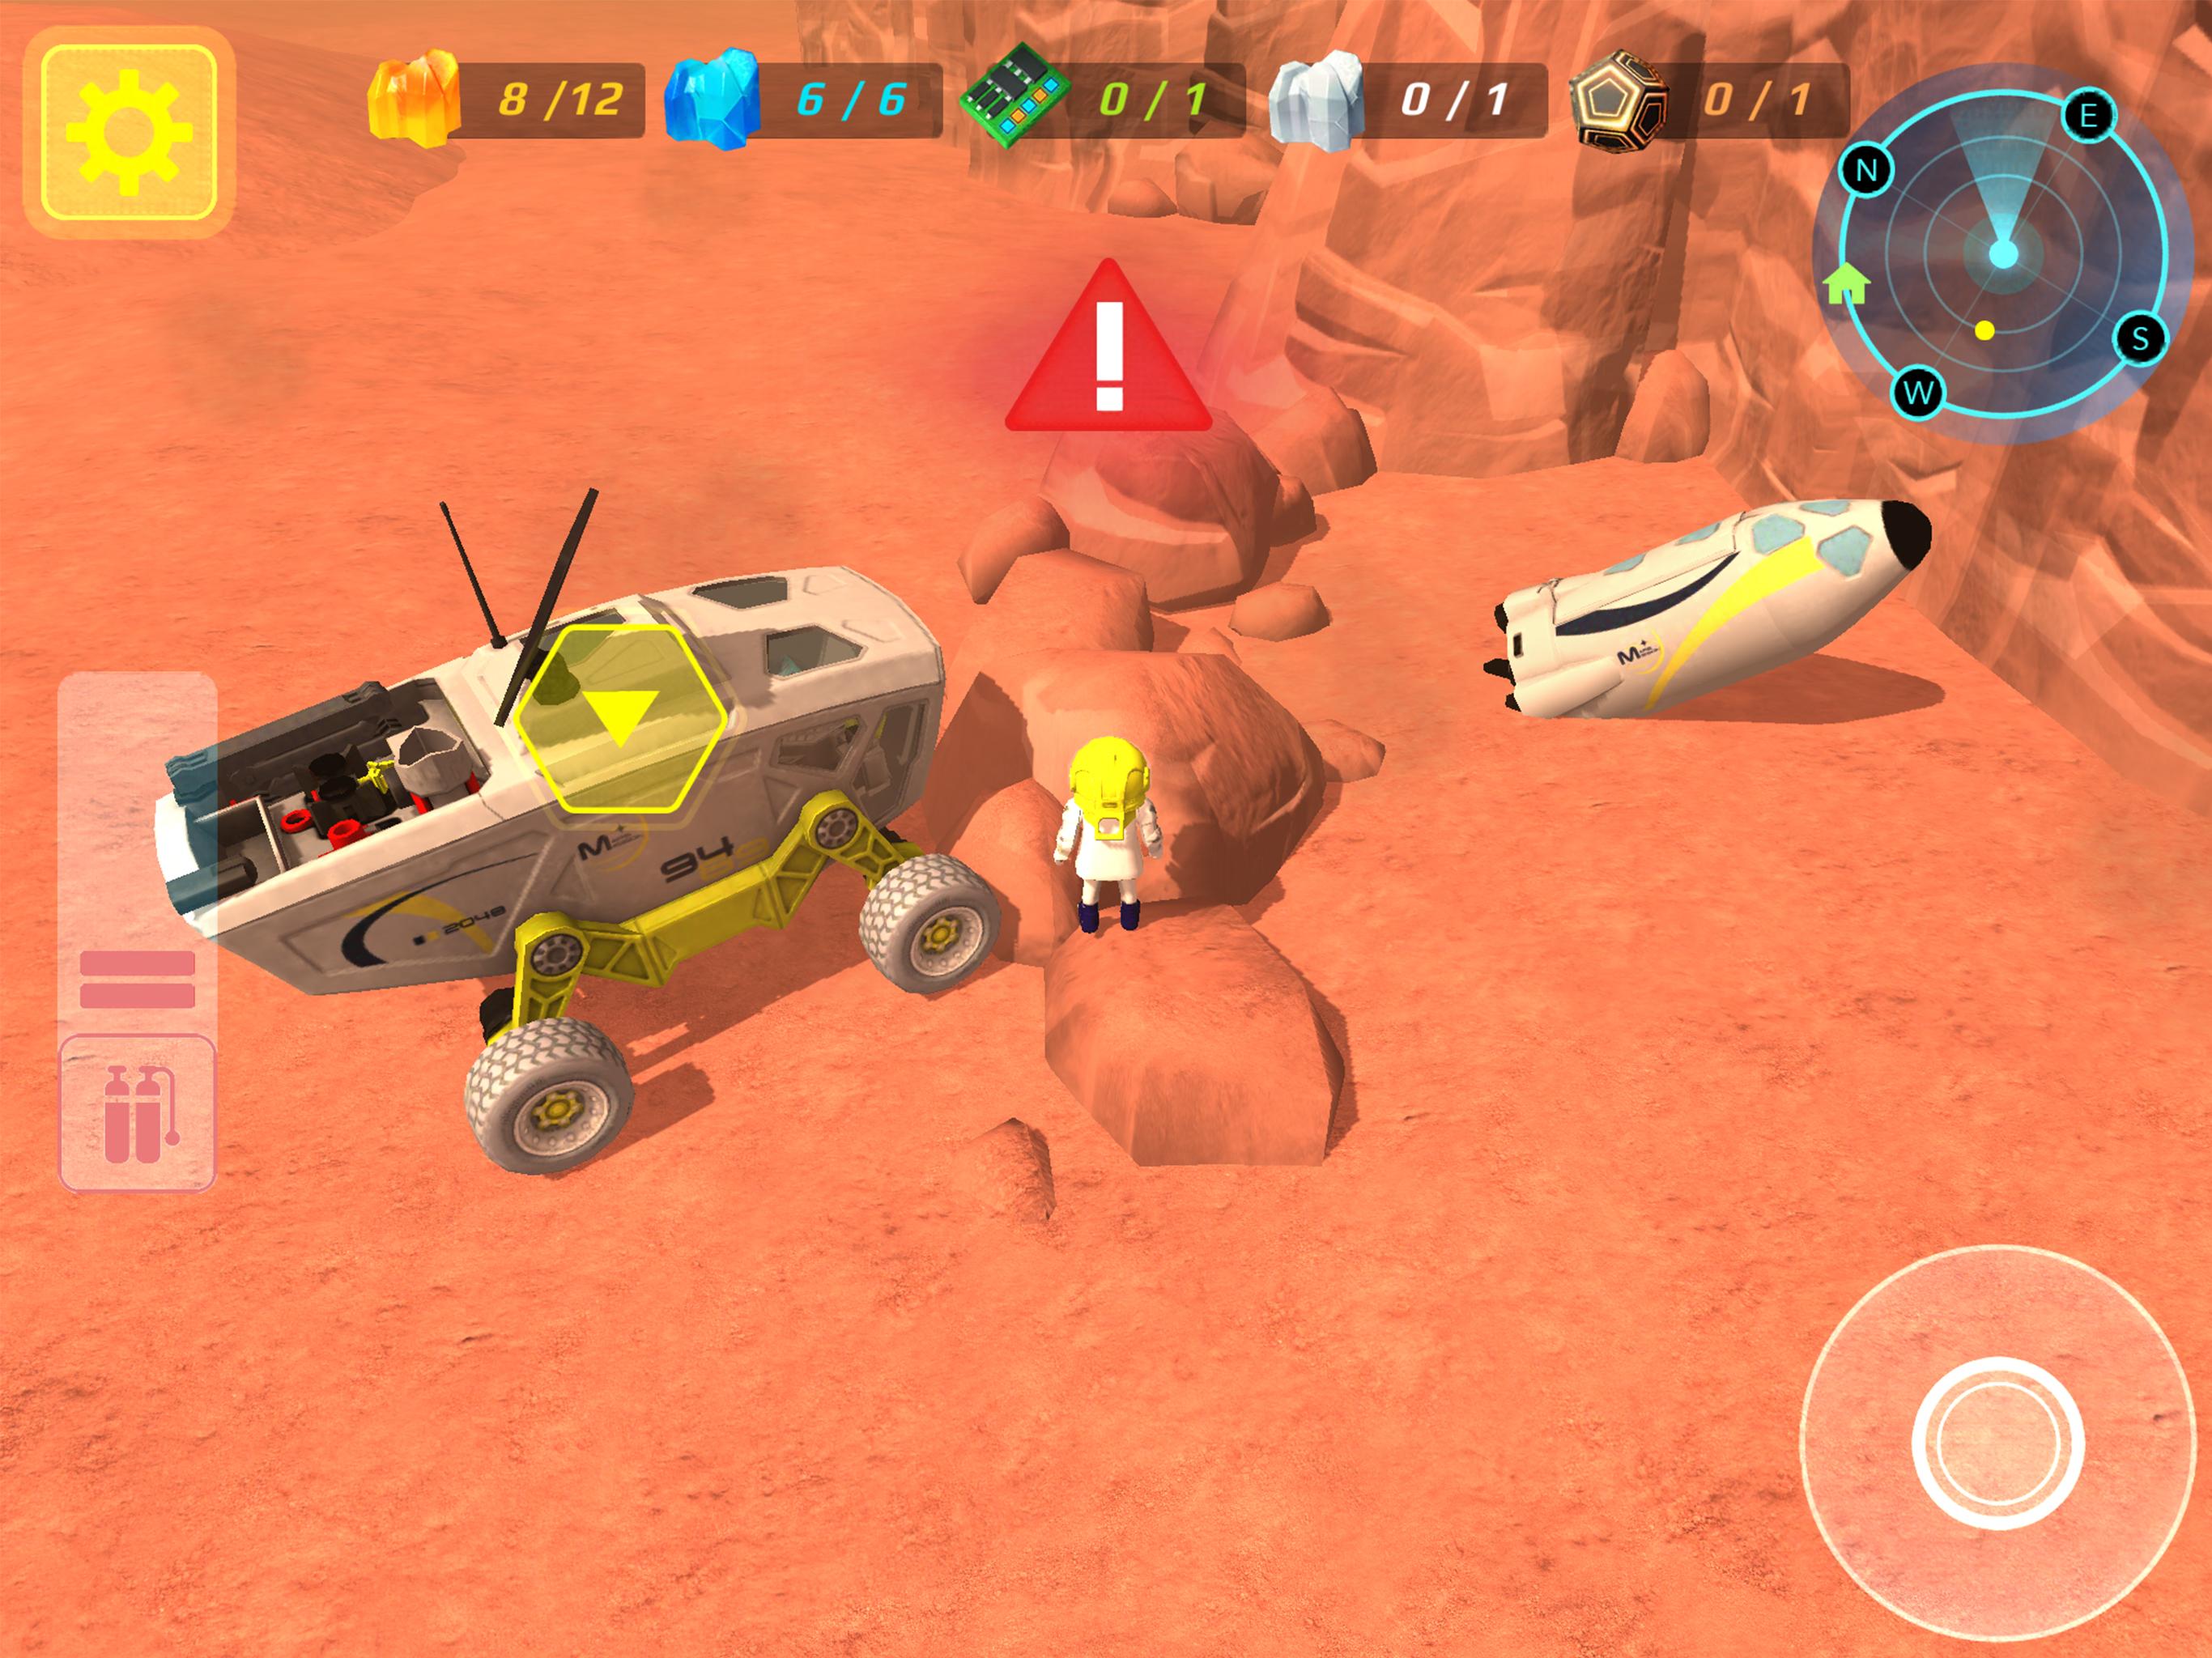 PLAYMOBIL Mars Mission APK 1.1.157 for Android – Download PLAYMOBIL Mars  Mission APK Latest Version from APKFab.com